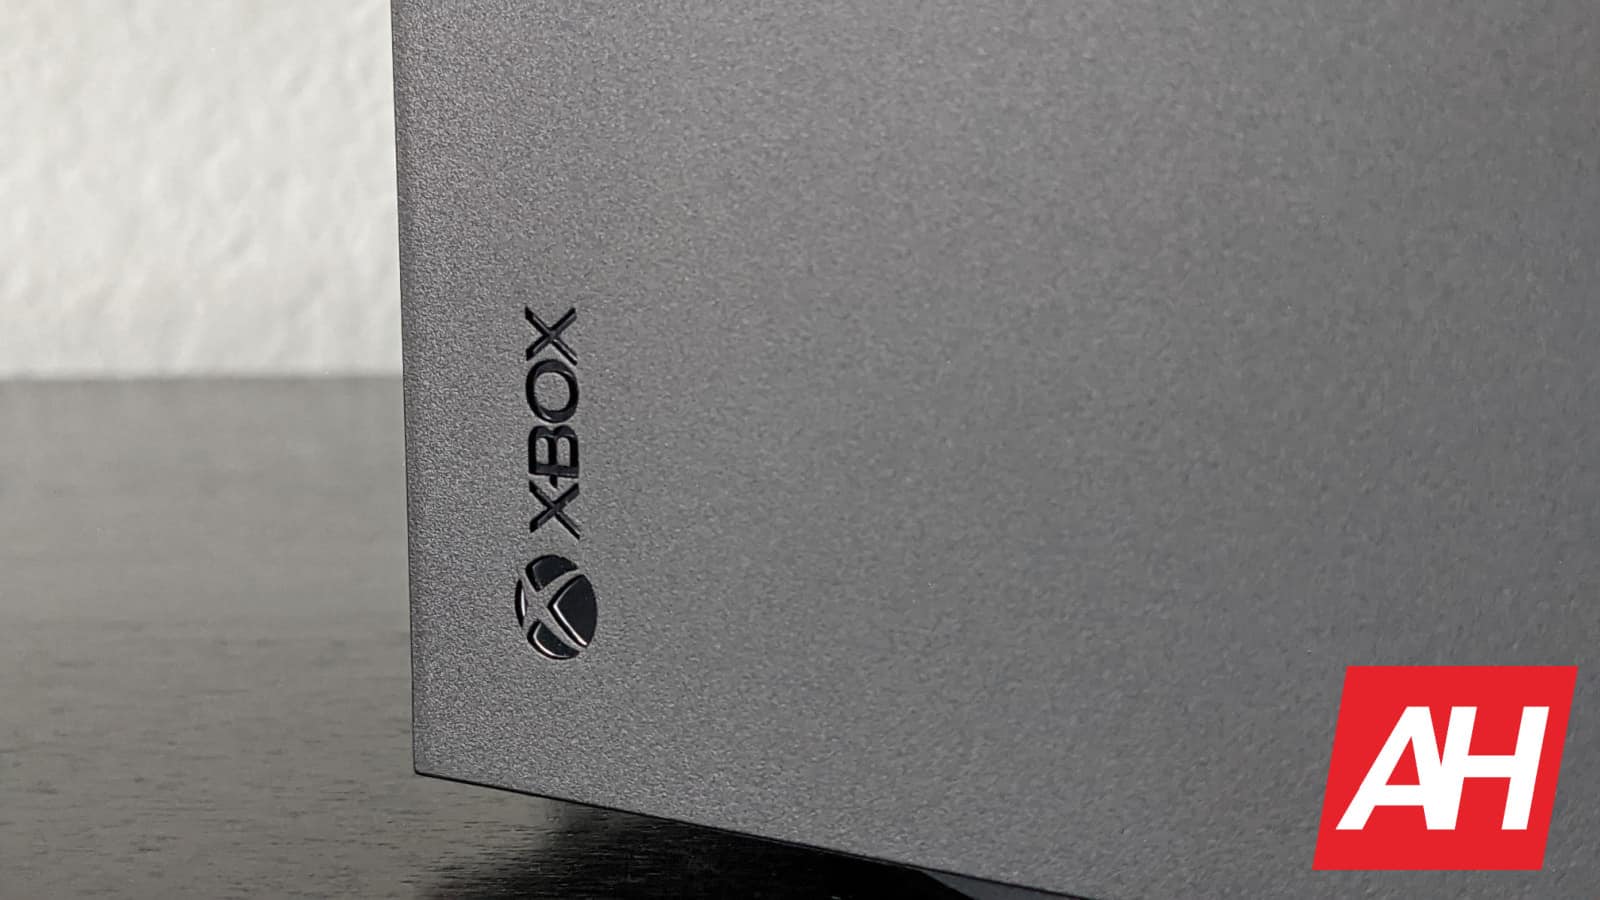 The next Xbox could potentially be compatible with PC stores